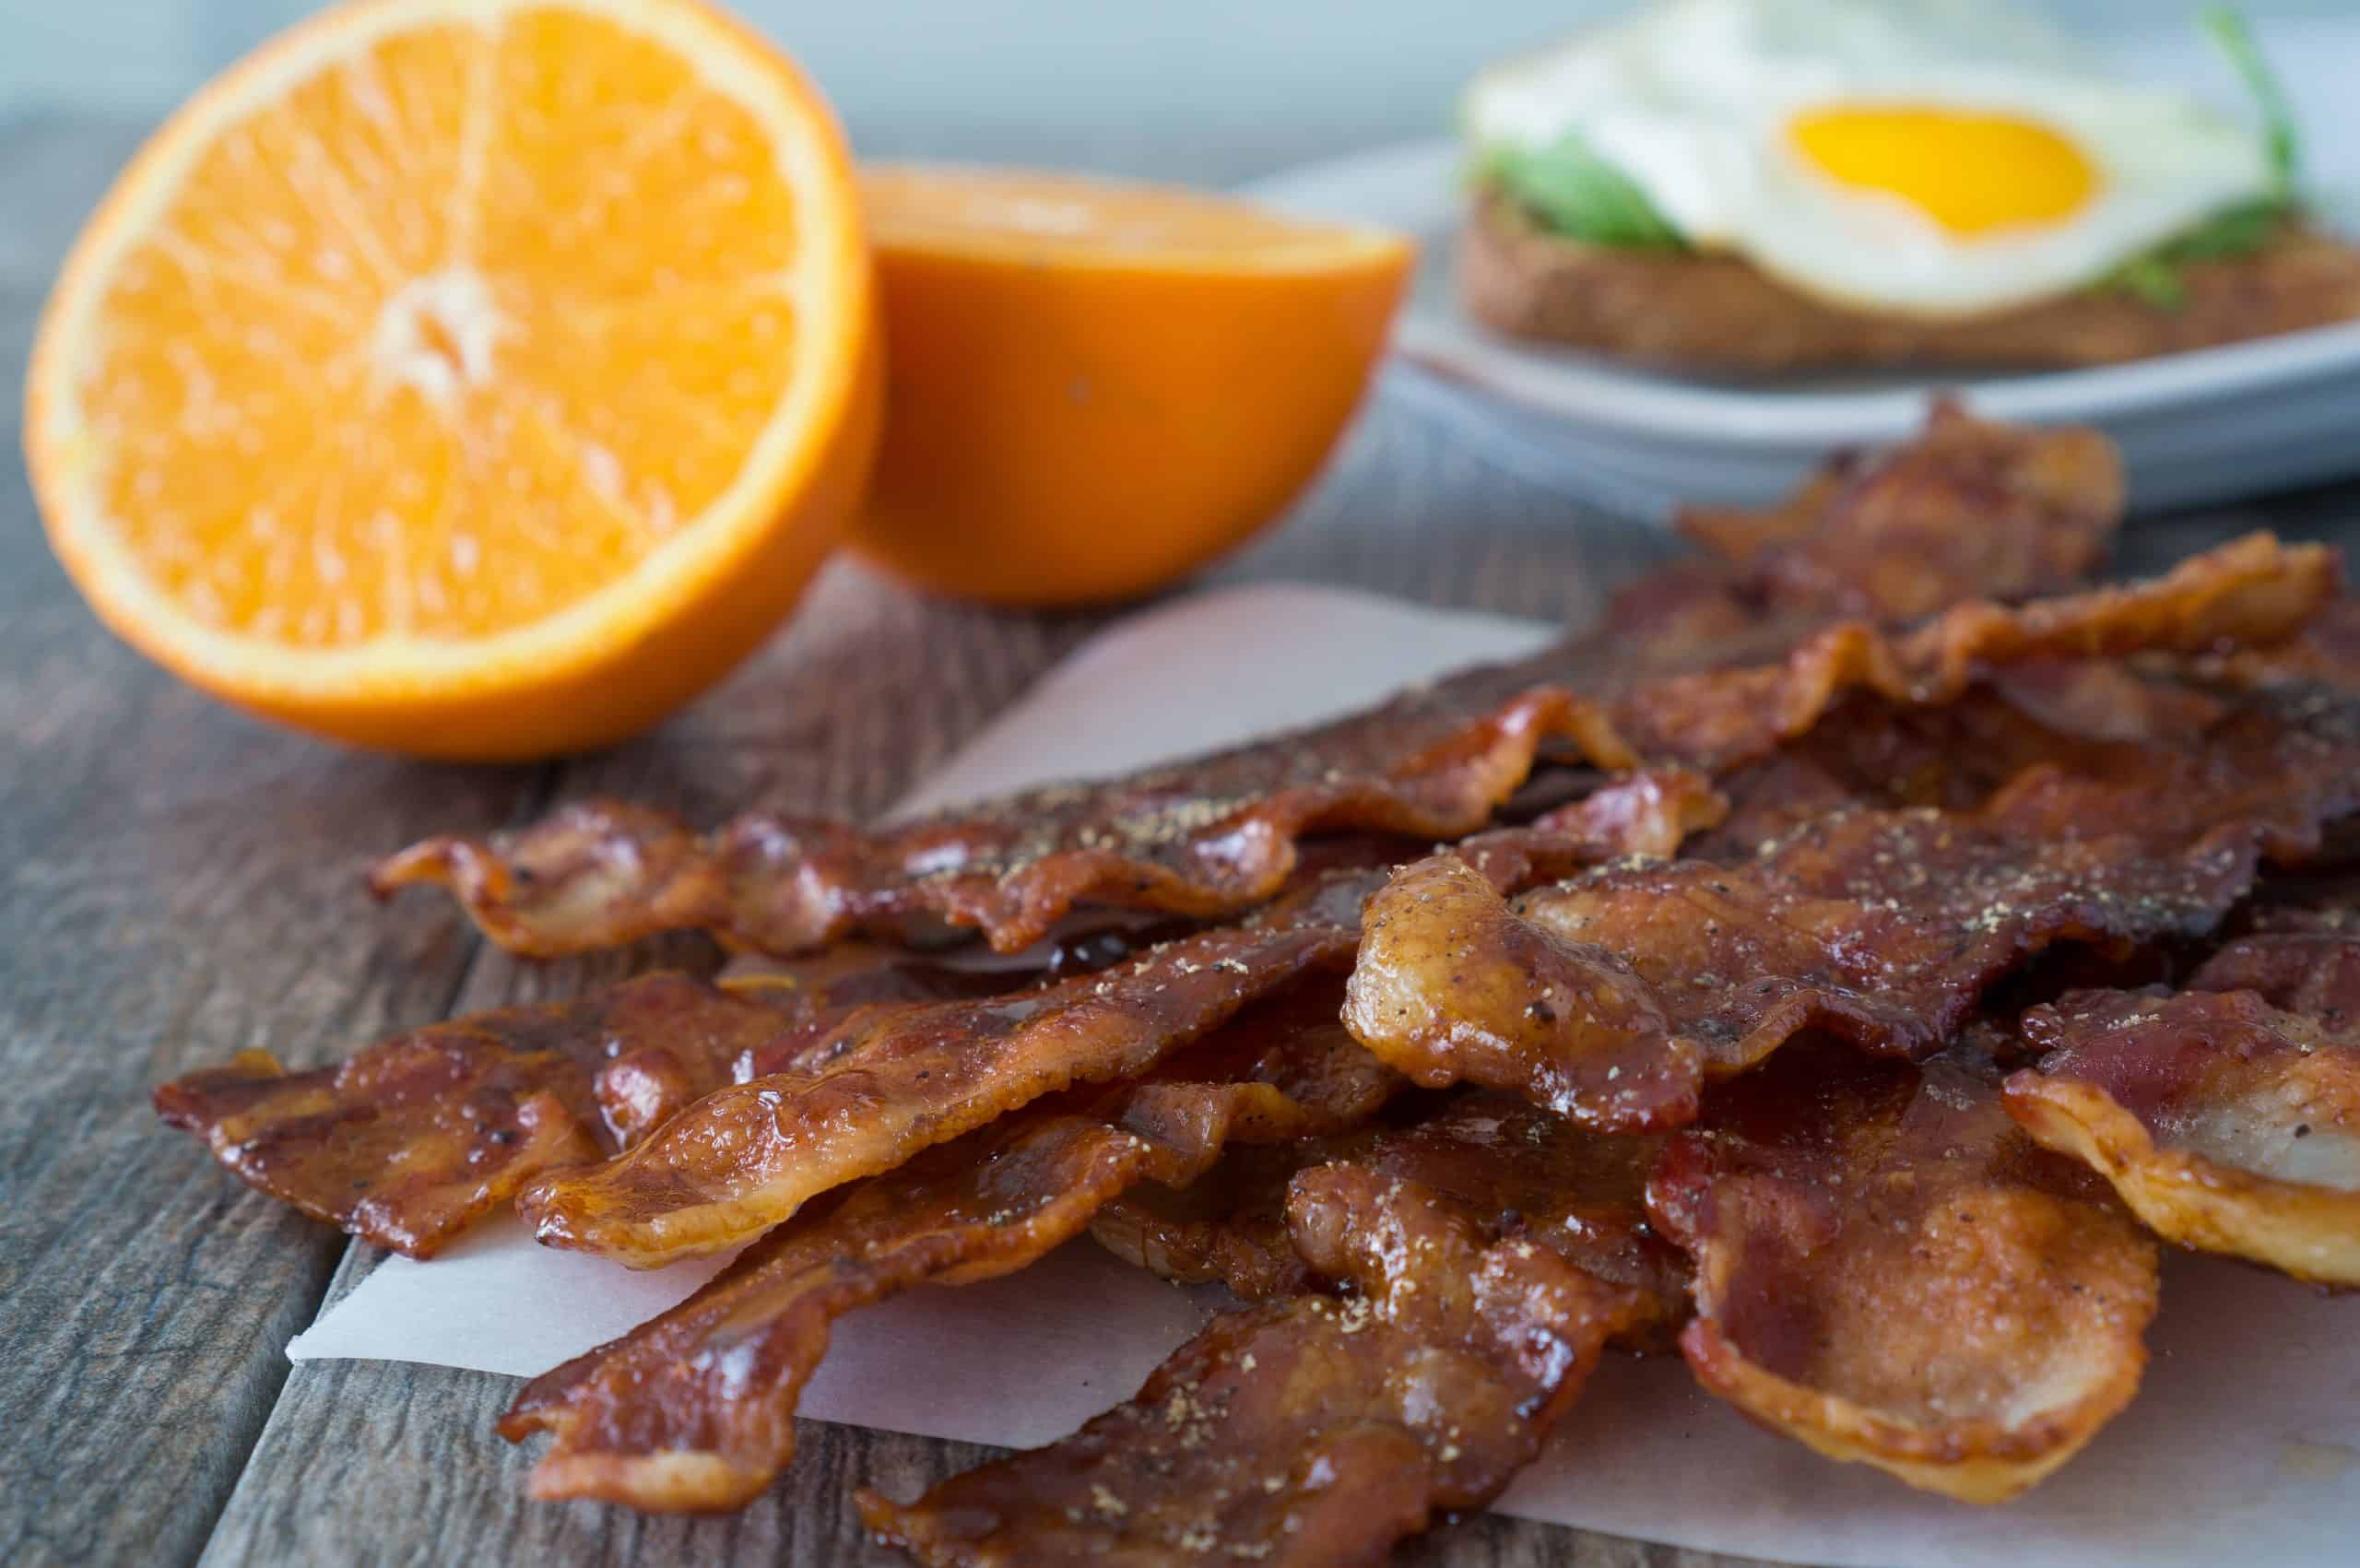 Coconut Nectar Candied Bacon – This 4-ingredient recipe for Coconut Nectar Candied Bacon gets you fabulously crispy, sweet-glazed bacon in under 20 minutes. Super simple ingredients - sweet coconut nectar, freshly cracked black pepper, a pinch of warm cinnamon, and thick-cut bacon. We love that this quick & easy one-pan dish is both refined sugar free & gluten free! These savory-meets-sweet slices will make you a brunch-hosting hero ♥ | freeyourfork.com